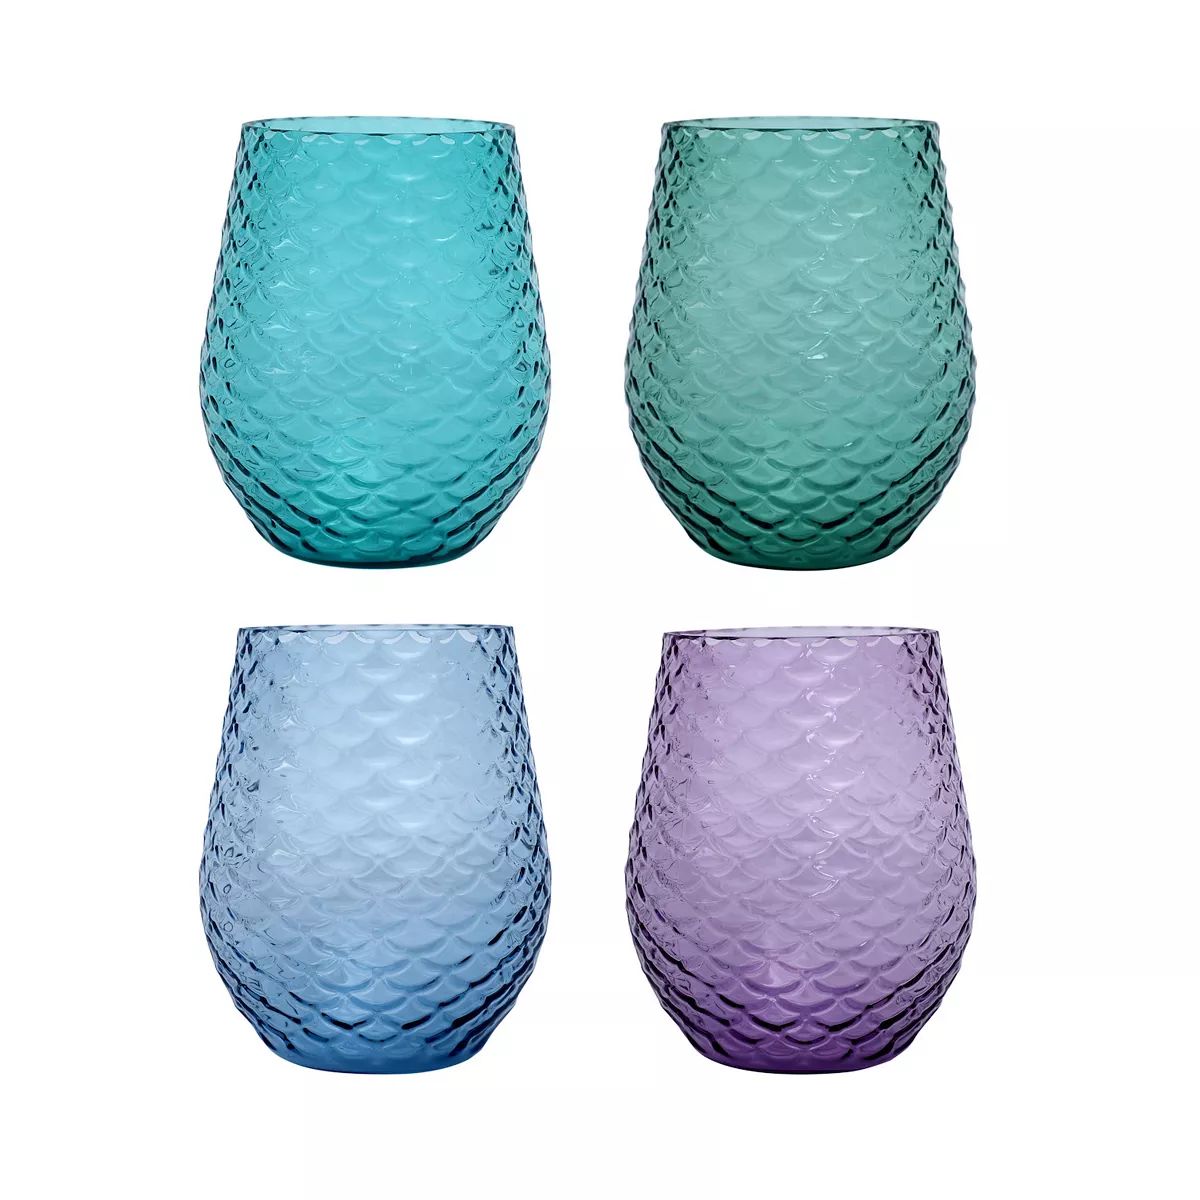 Celebrate Together Summer Mermaid Scale Stemless Wine Glasses 4-Piece Set | Kohl's